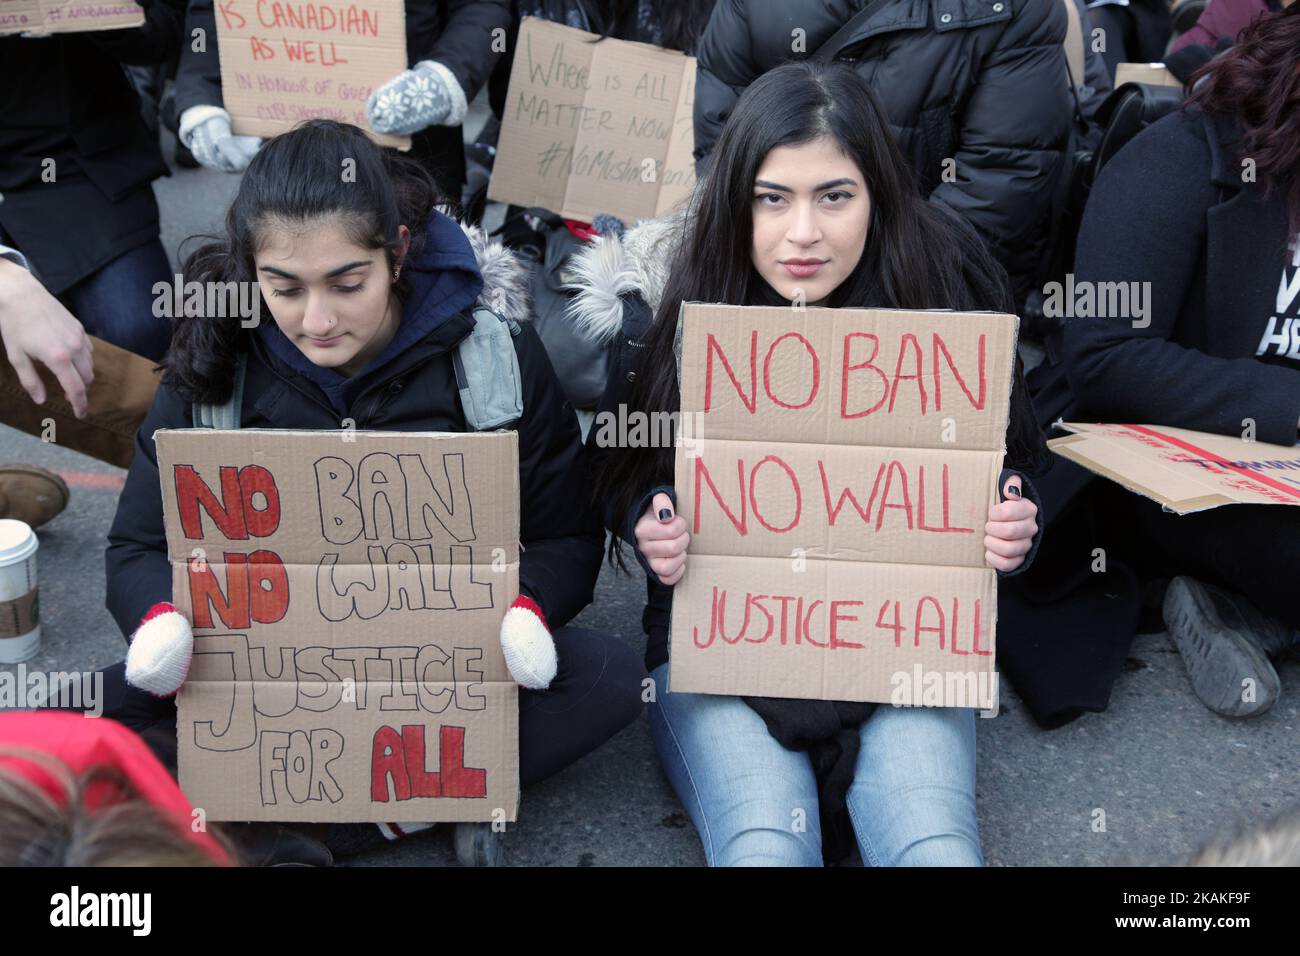 Protestors hold signs saying 'no ban, no wall' during a massive protest against President Trump's travel ban outside of the U.S. Consulate in downtown Toronto, Ontario, Canada, on January 30, 2017. Canadians joined countries around the world in protesting against American President Donald Trump's executive order, banning citizens of seven majority Muslim countries (Iran, Iraq, Sudan, Somalia, Syria, Yemen and Libya) from entering the United States for the next three months and banning Syrian refugees from indefinitely entering America. (Photo by Creative Touch Imaging Ltd./NurPhoto) *** Please Stock Photo